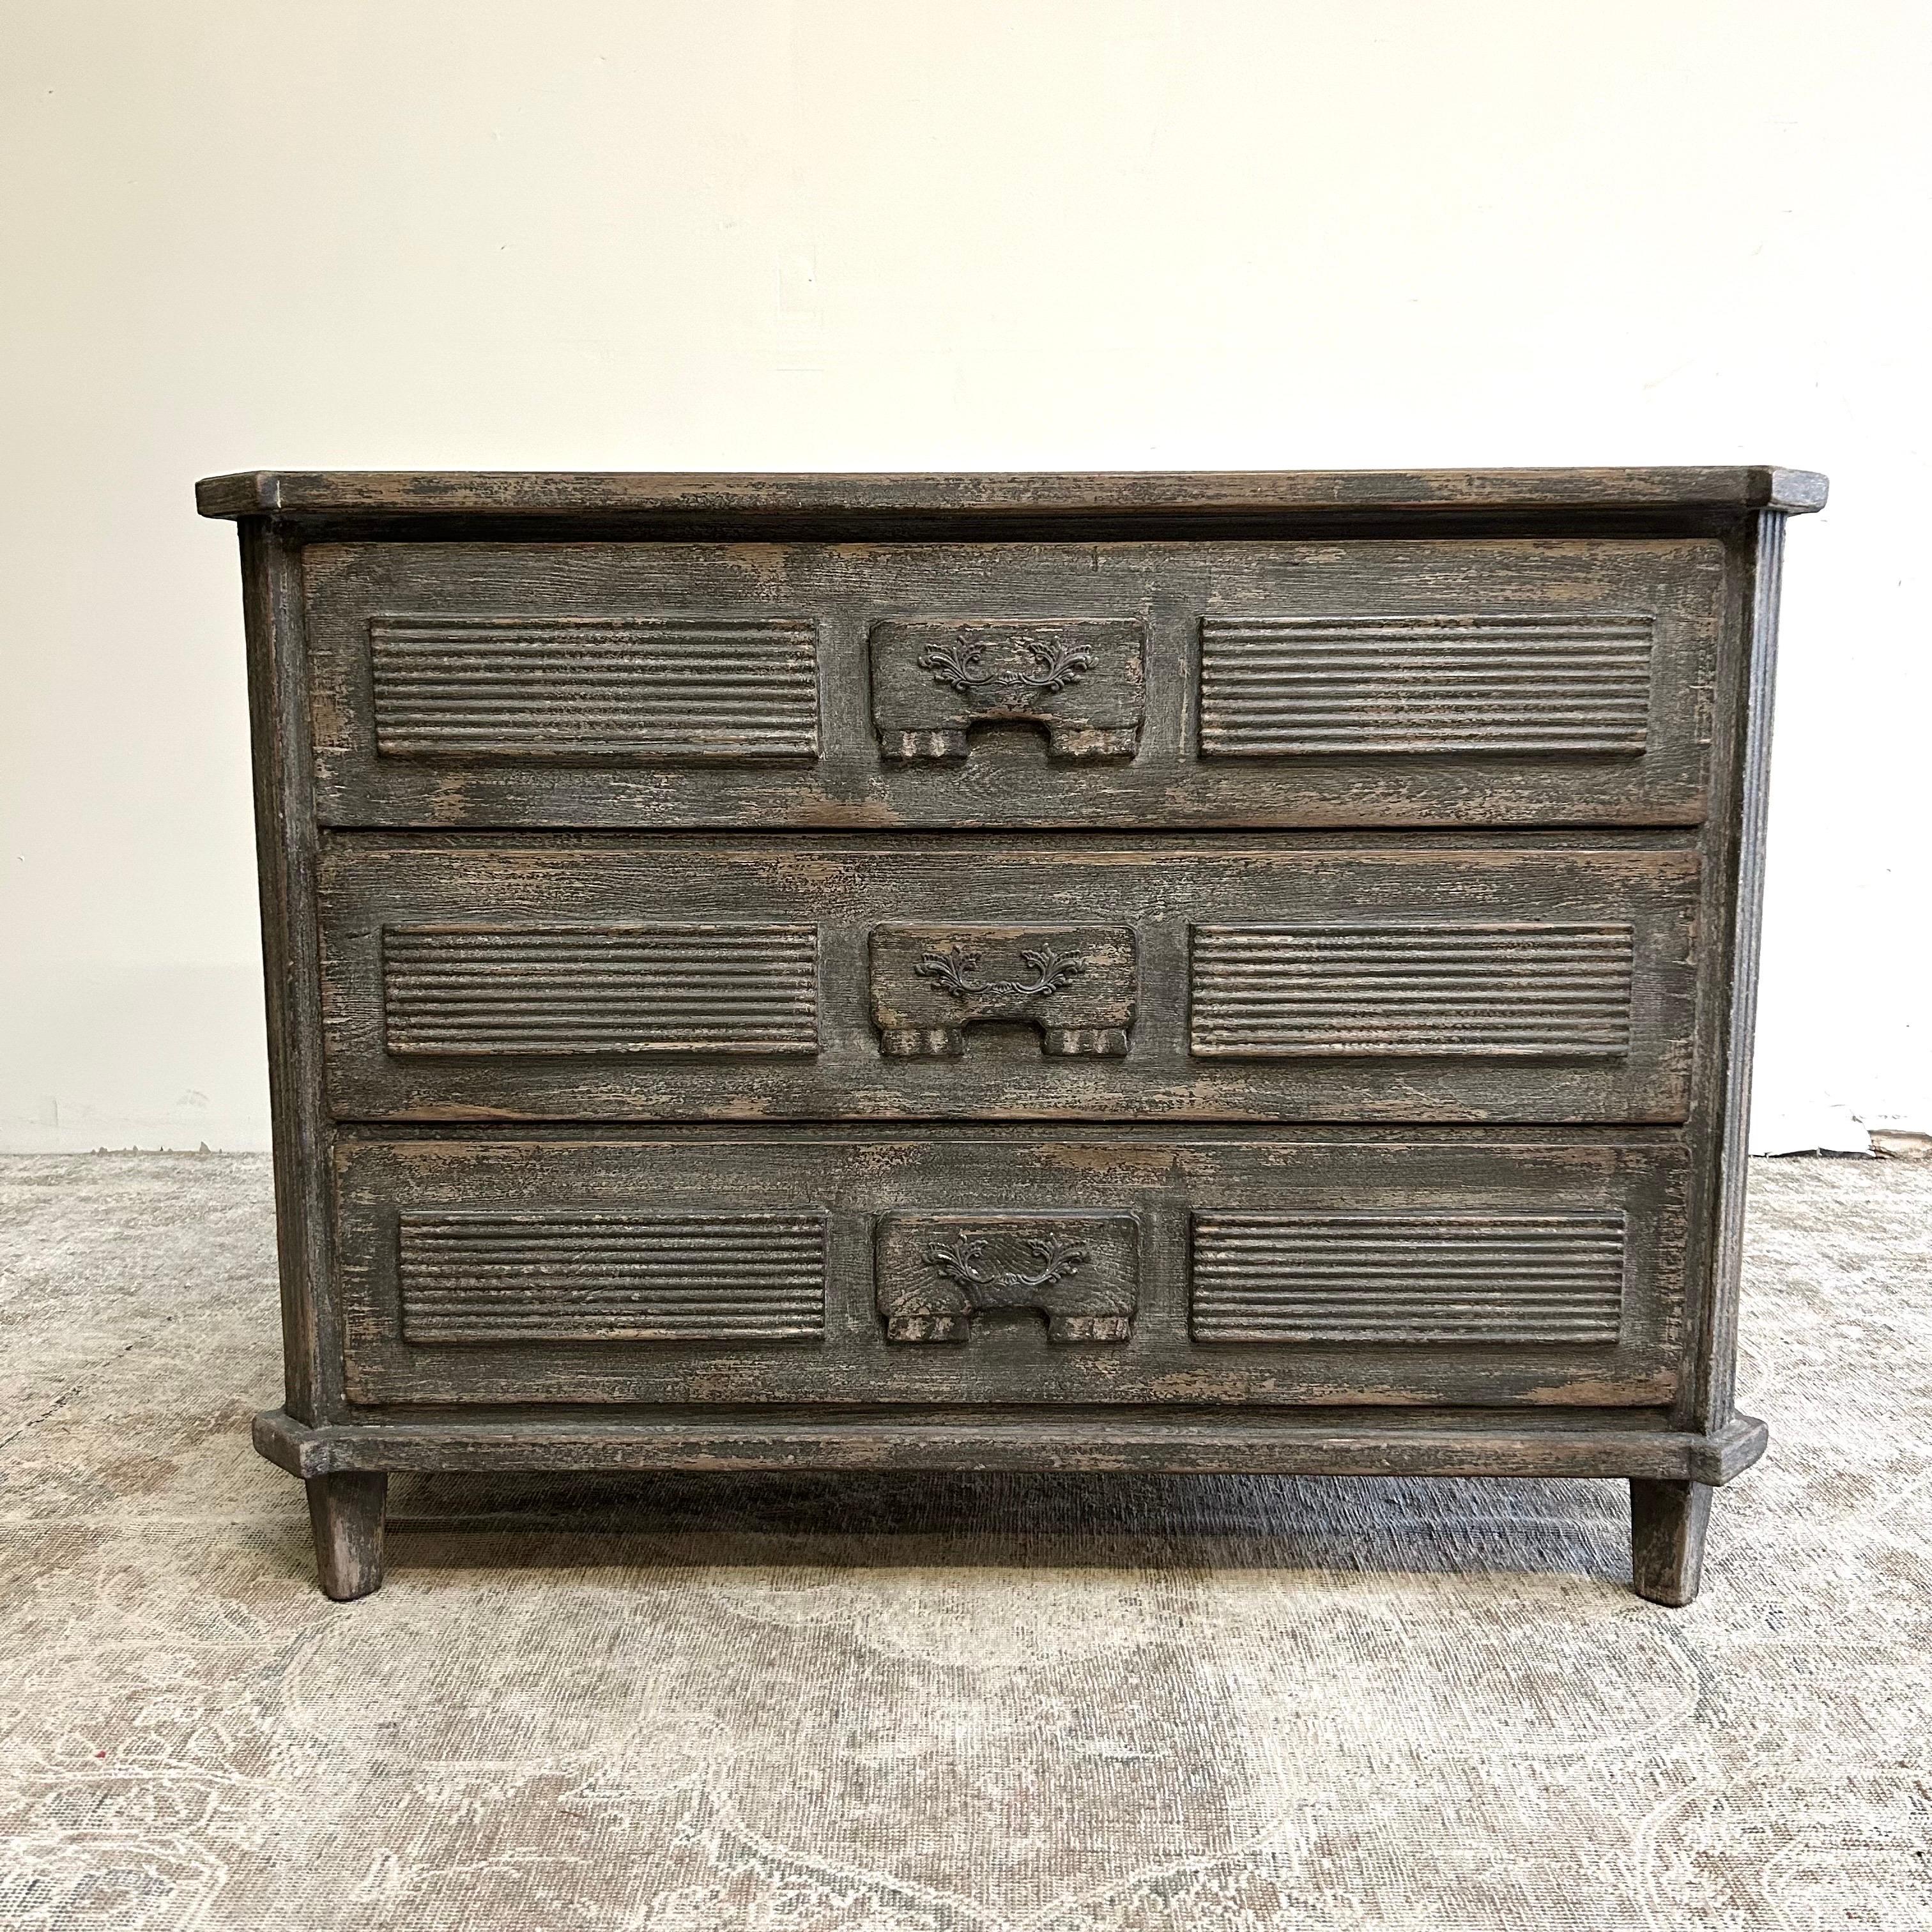 Vintage style painted grey chest of drawers. 
Size: 47” W x 20” D x 34” H
Dovetail finished solid wood drawers, painted in a dark charcoal distressed finish.
Weight 200lbs.

